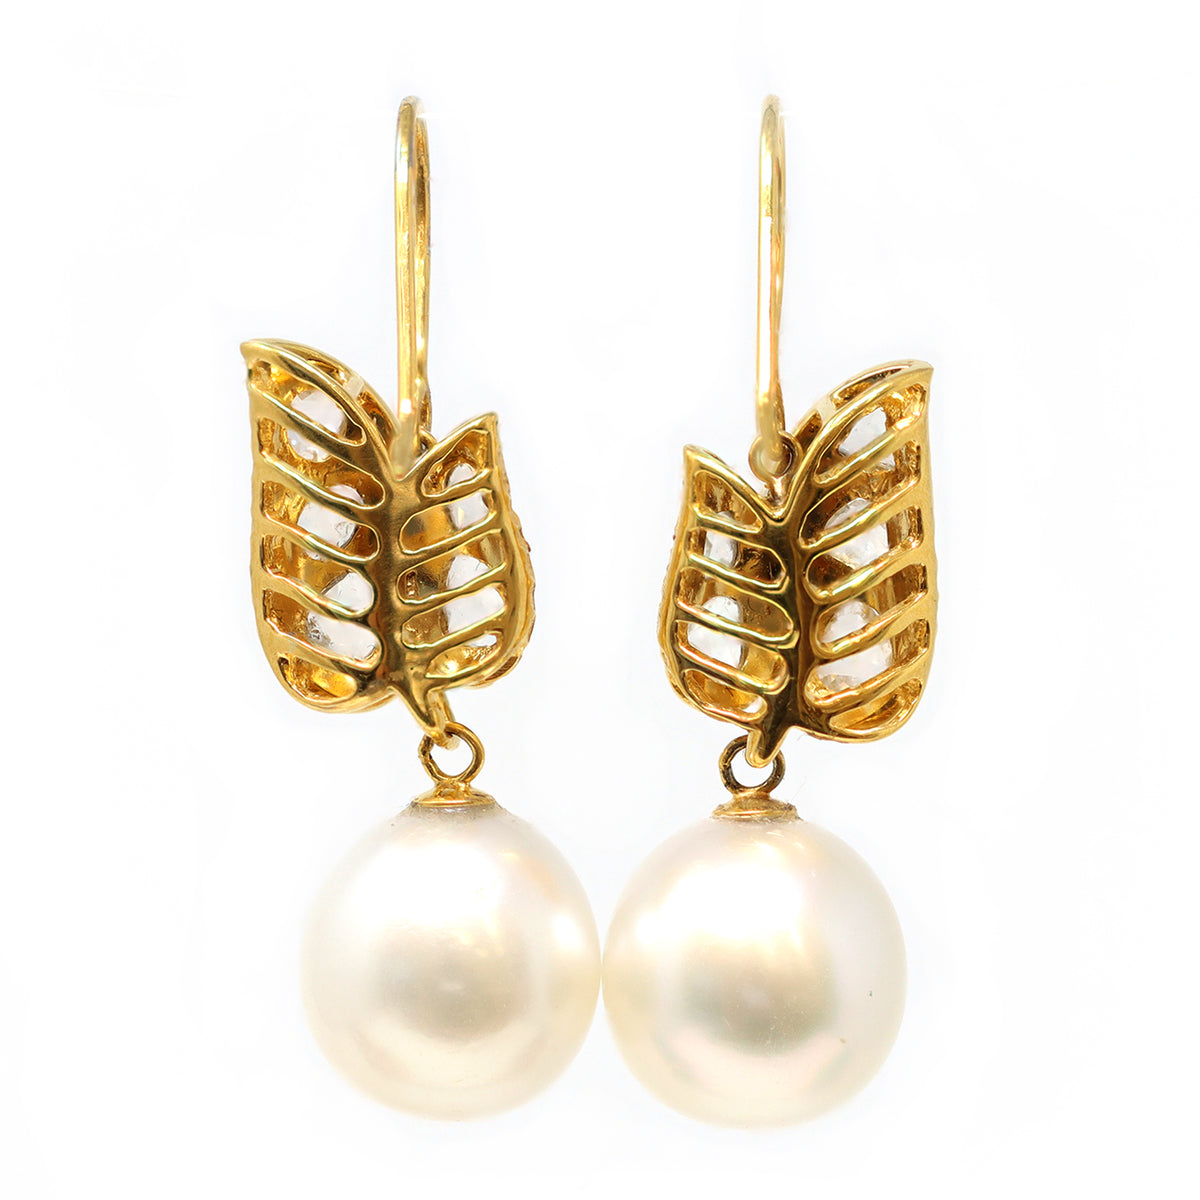 South Sea Pearl and Rose Cut Diamond Earrings in 18 Karat Yellow Gold back view